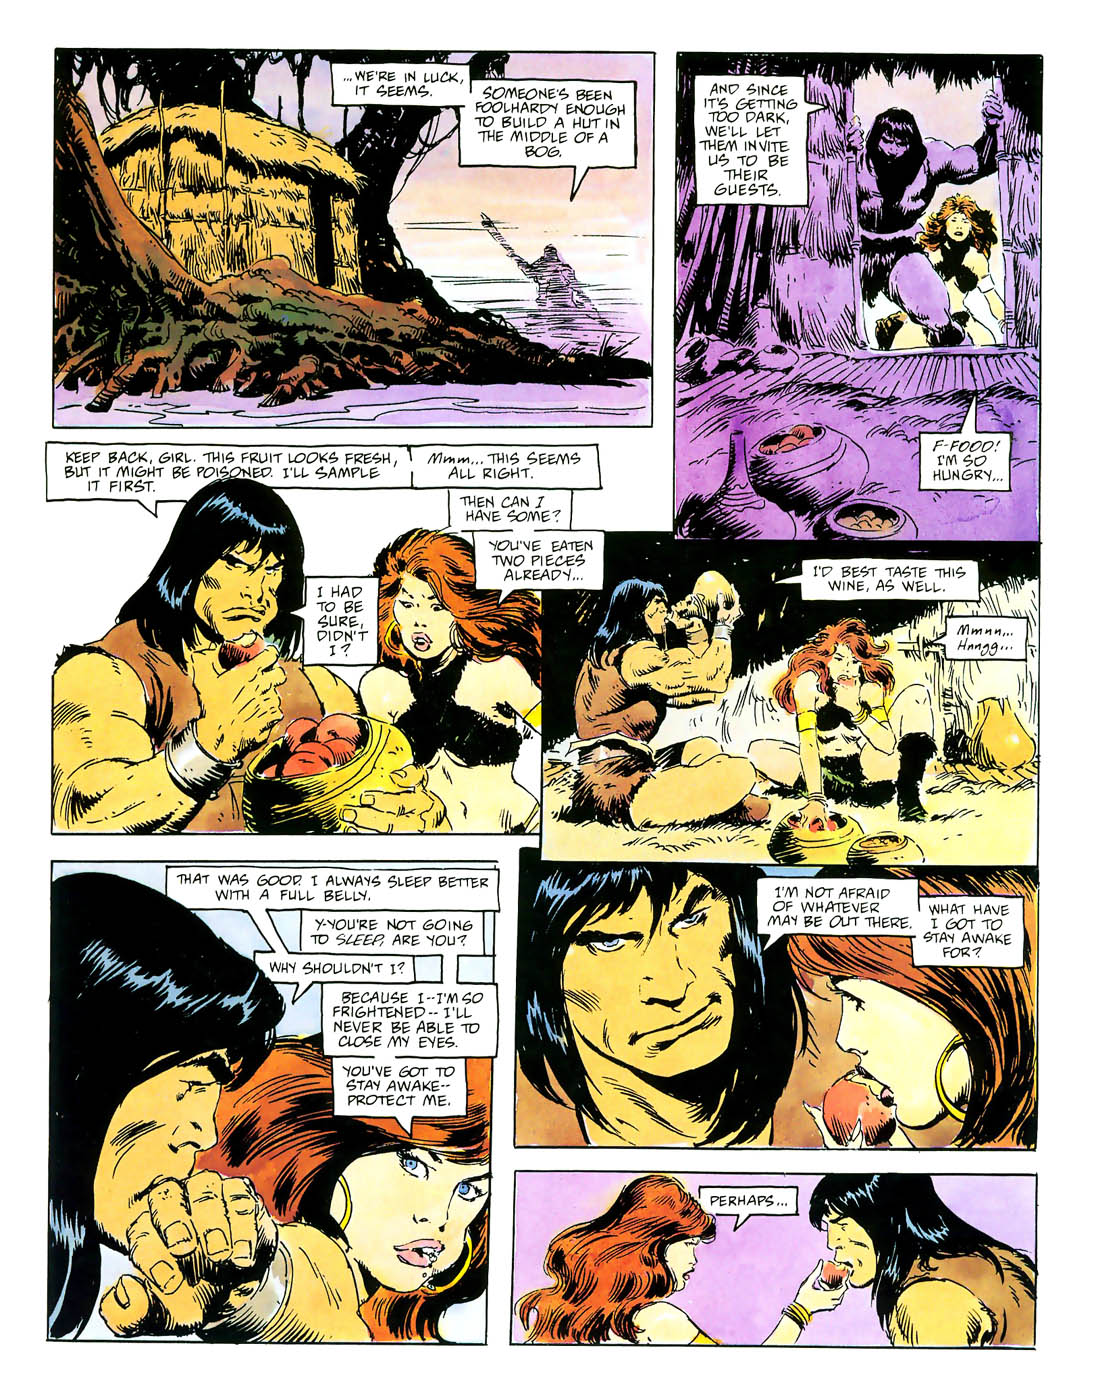 Conan #41 - Rogues in the House - Part 1: Rogues At The Door (Issue)